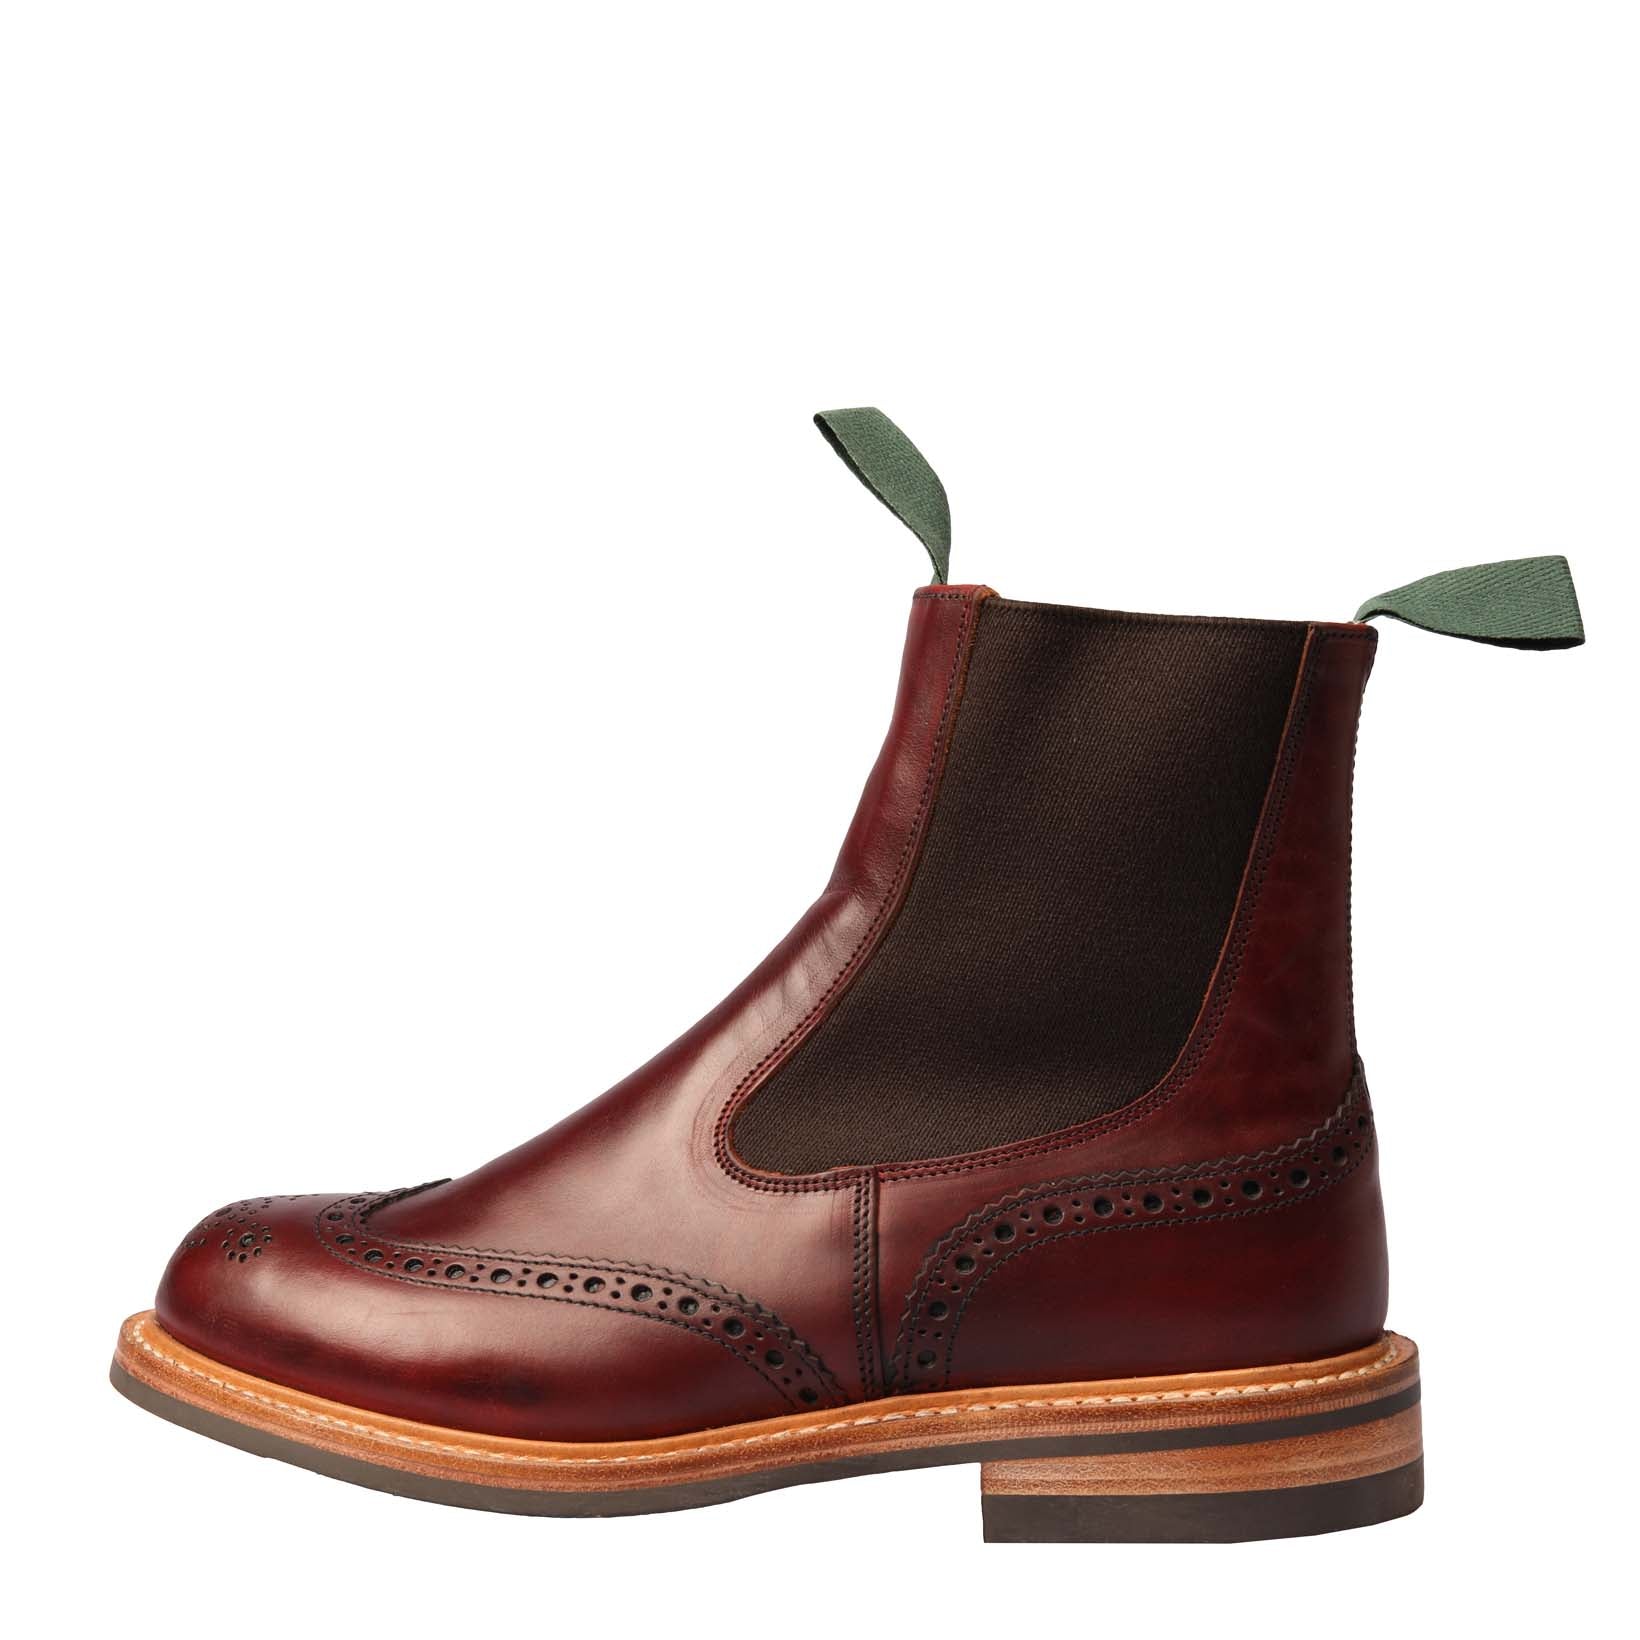 Silvia Brouge boot-Tricker's-Conrad Hasselbach Shoes & Garment